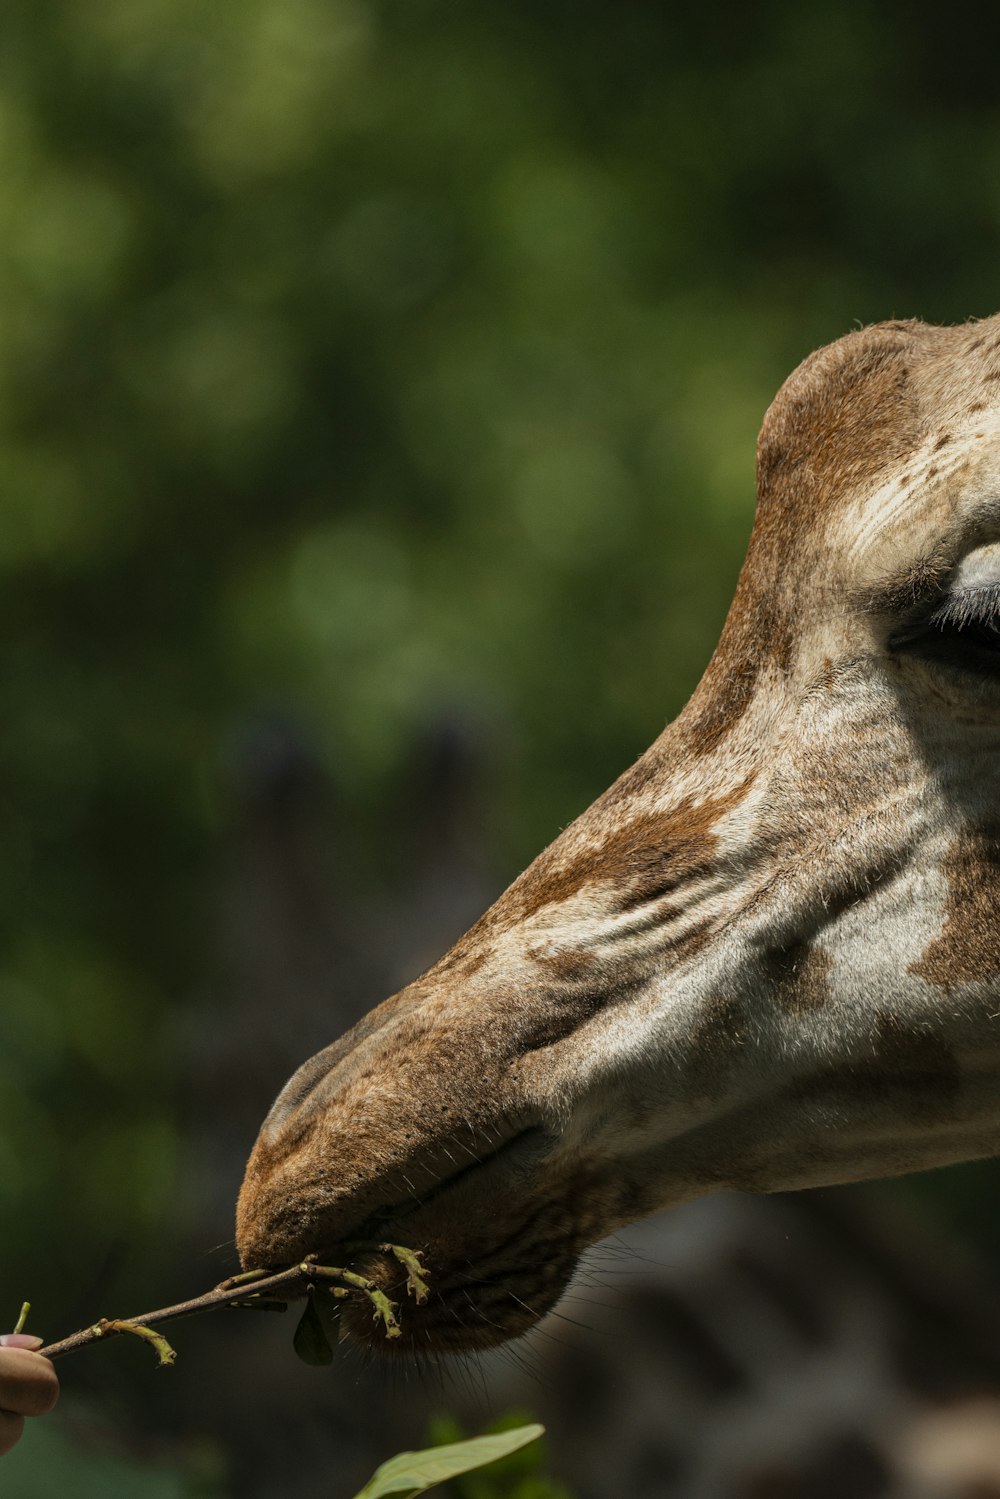 a close up of a giraffe eating leaves from a tree